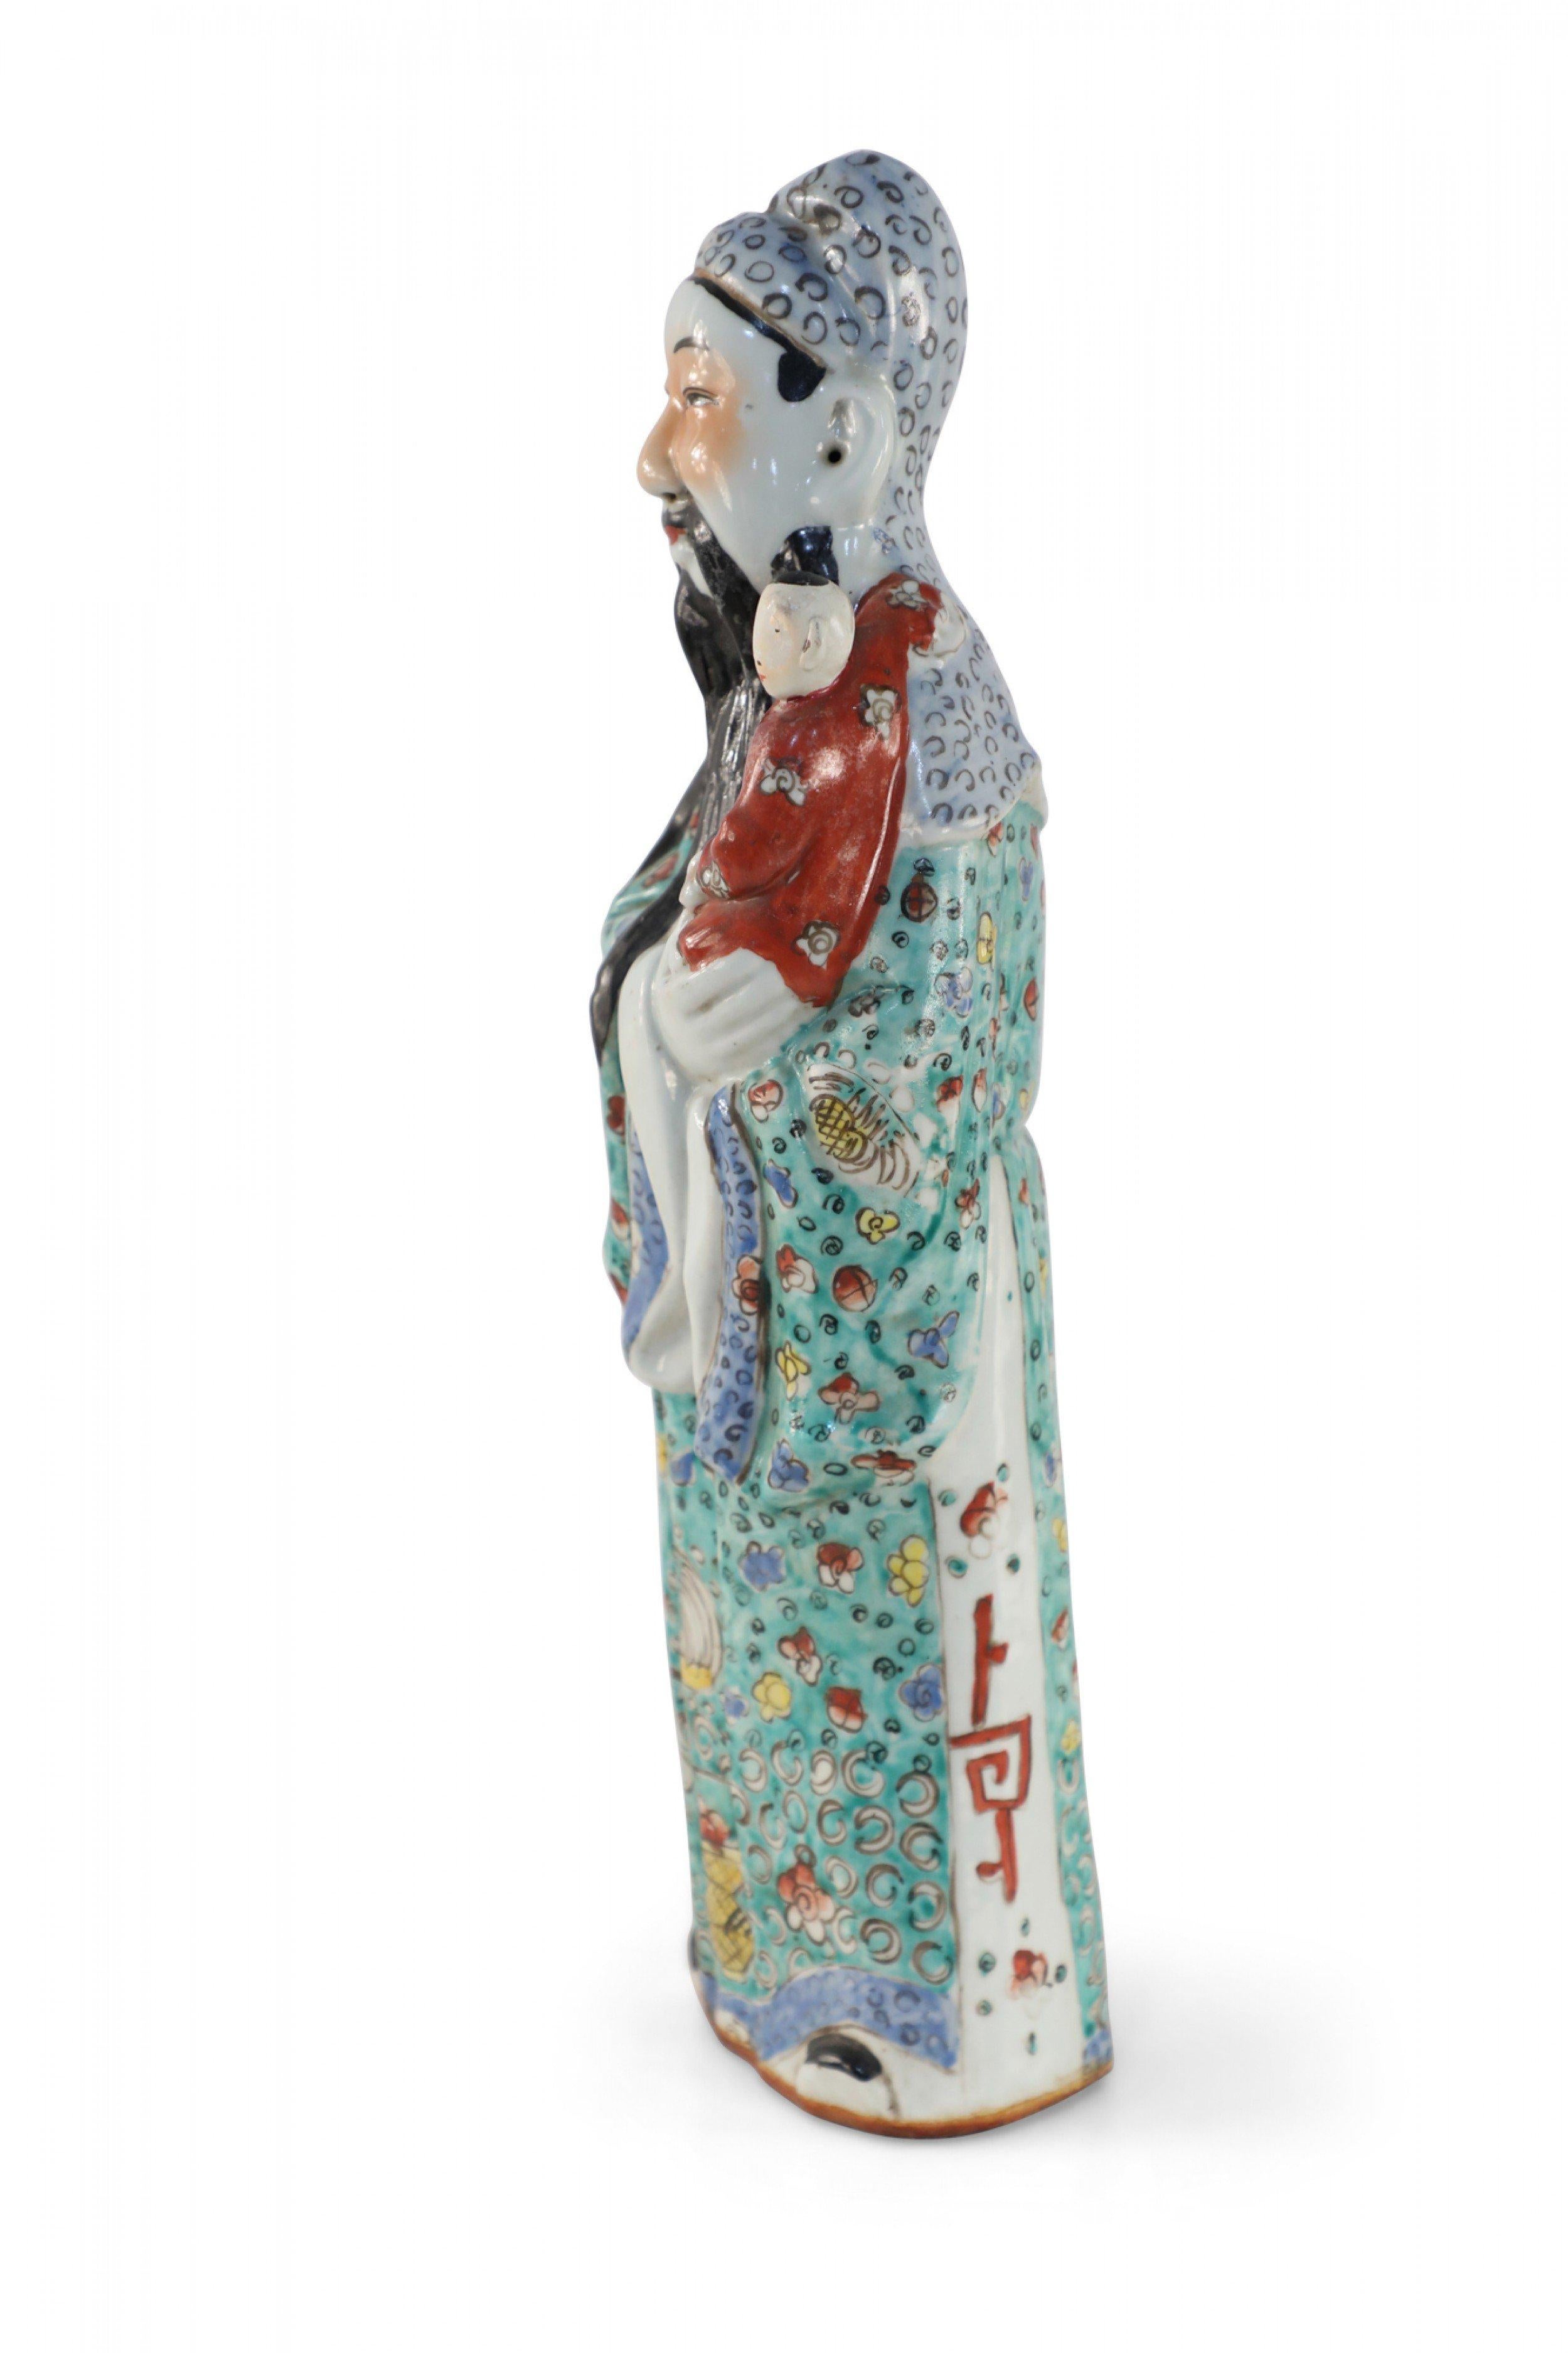 Antique Chinese (Early 20th Century) glazed porcelain statue of Lu Xing, one of the deities of the three stars considered essential in Chinese astrology, each representing an attribute of a good life. Xu Ling personifies wealth, influence and